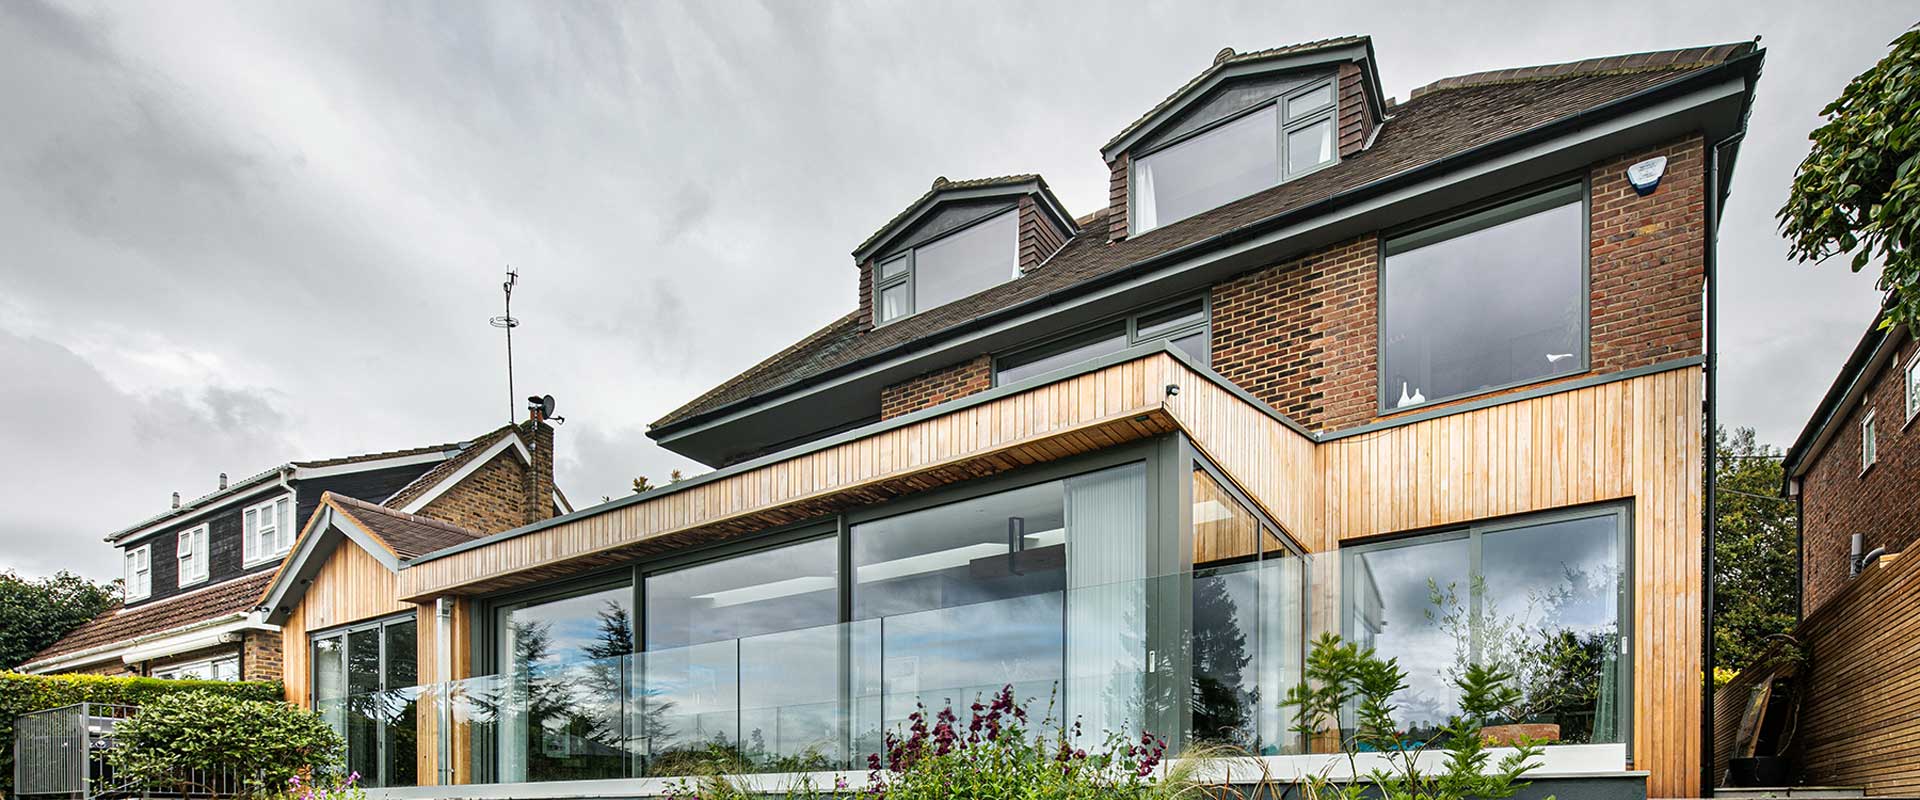 An image of a large extension on the rear of a family home with impressive alu-clad sliding doors